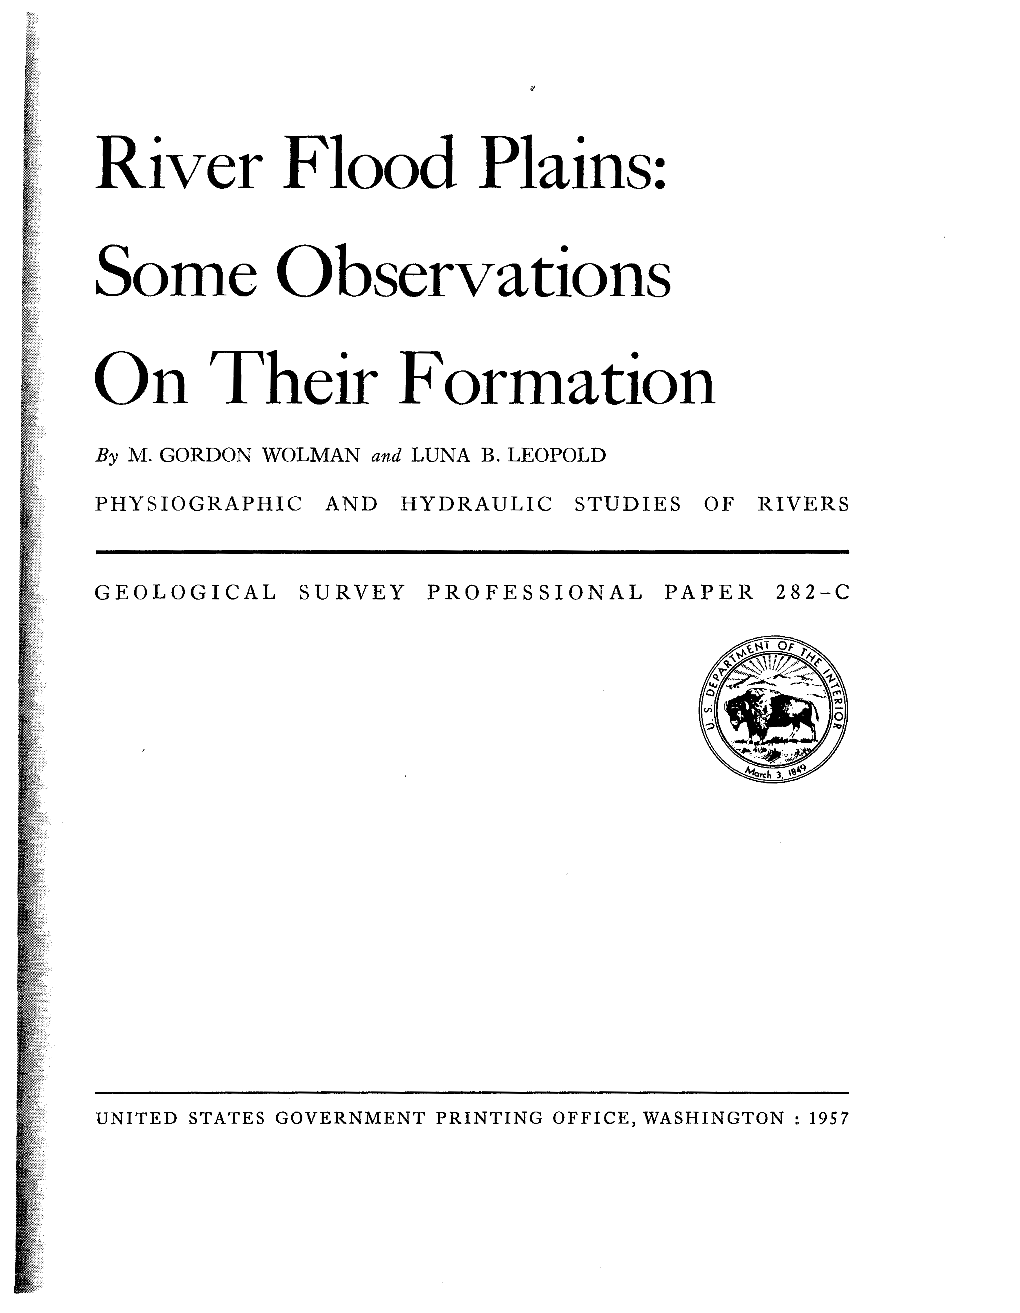 River Flood Plains: Some Observations on Their Formation